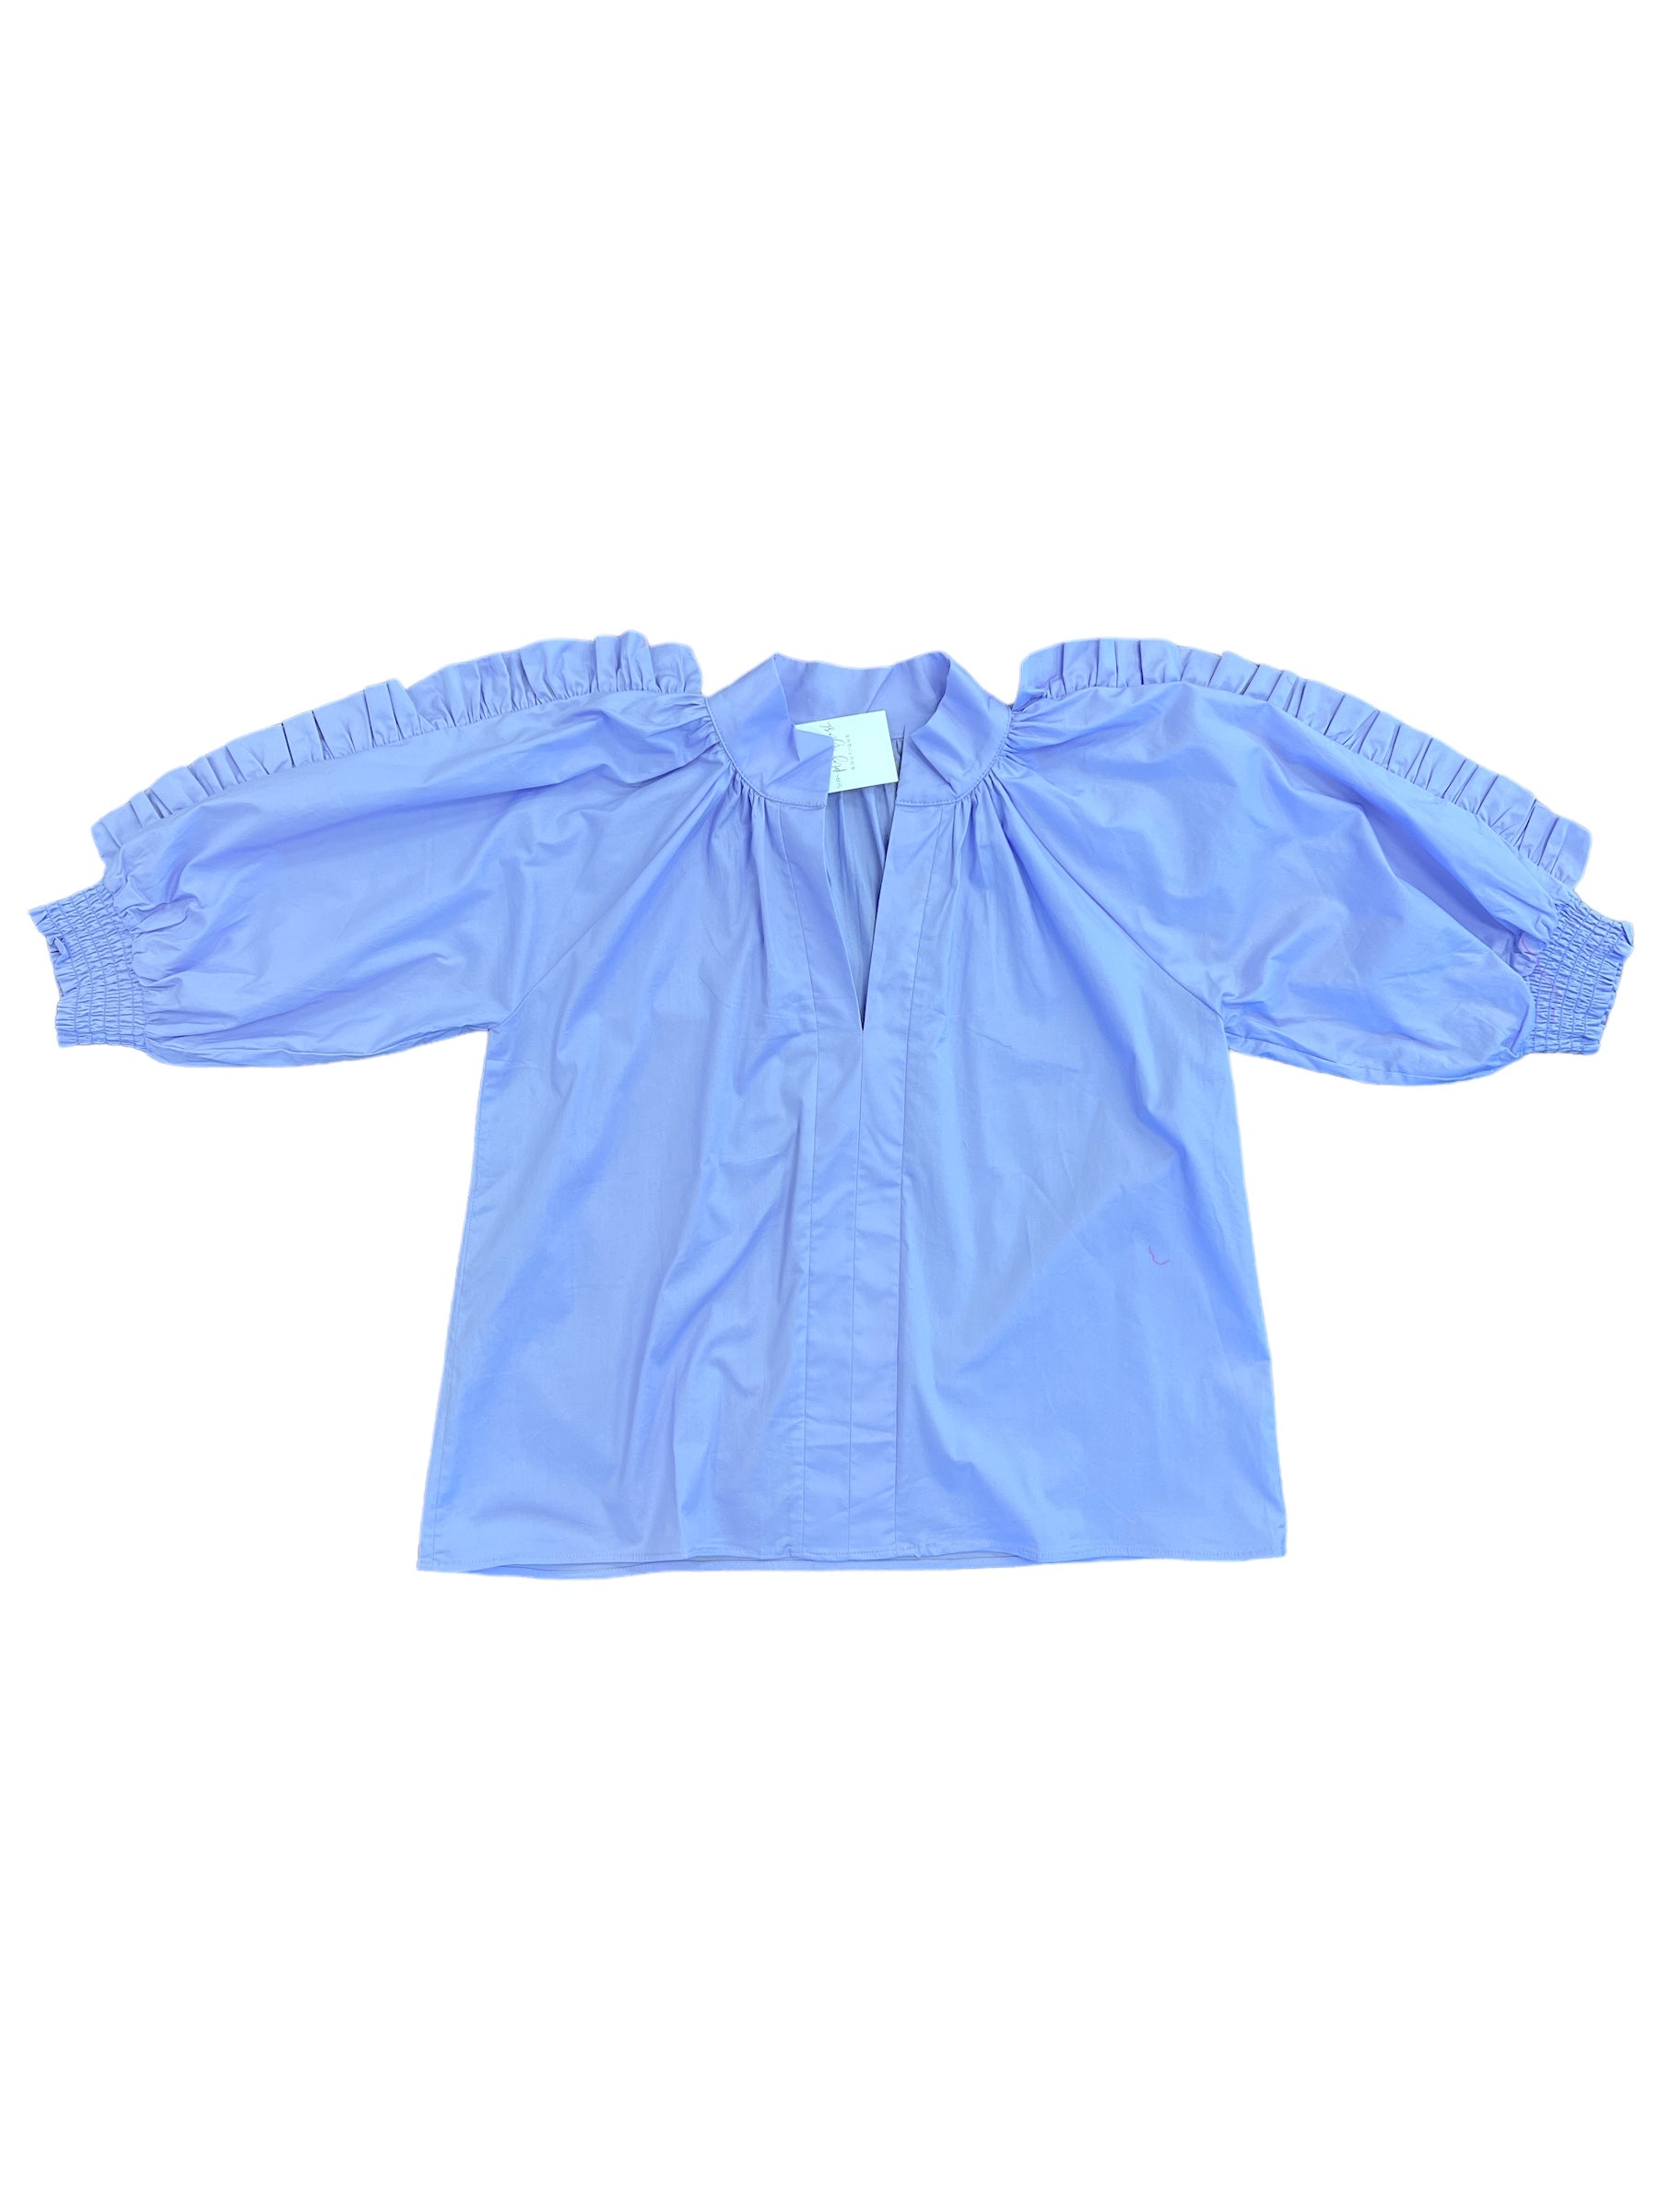 Oh My Ruffle Blouse-130 Dressy Tops & Blouses-Simply Stylish Boutique-Simply Stylish Boutique | Women’s & Kid’s Fashion | Paducah, KY